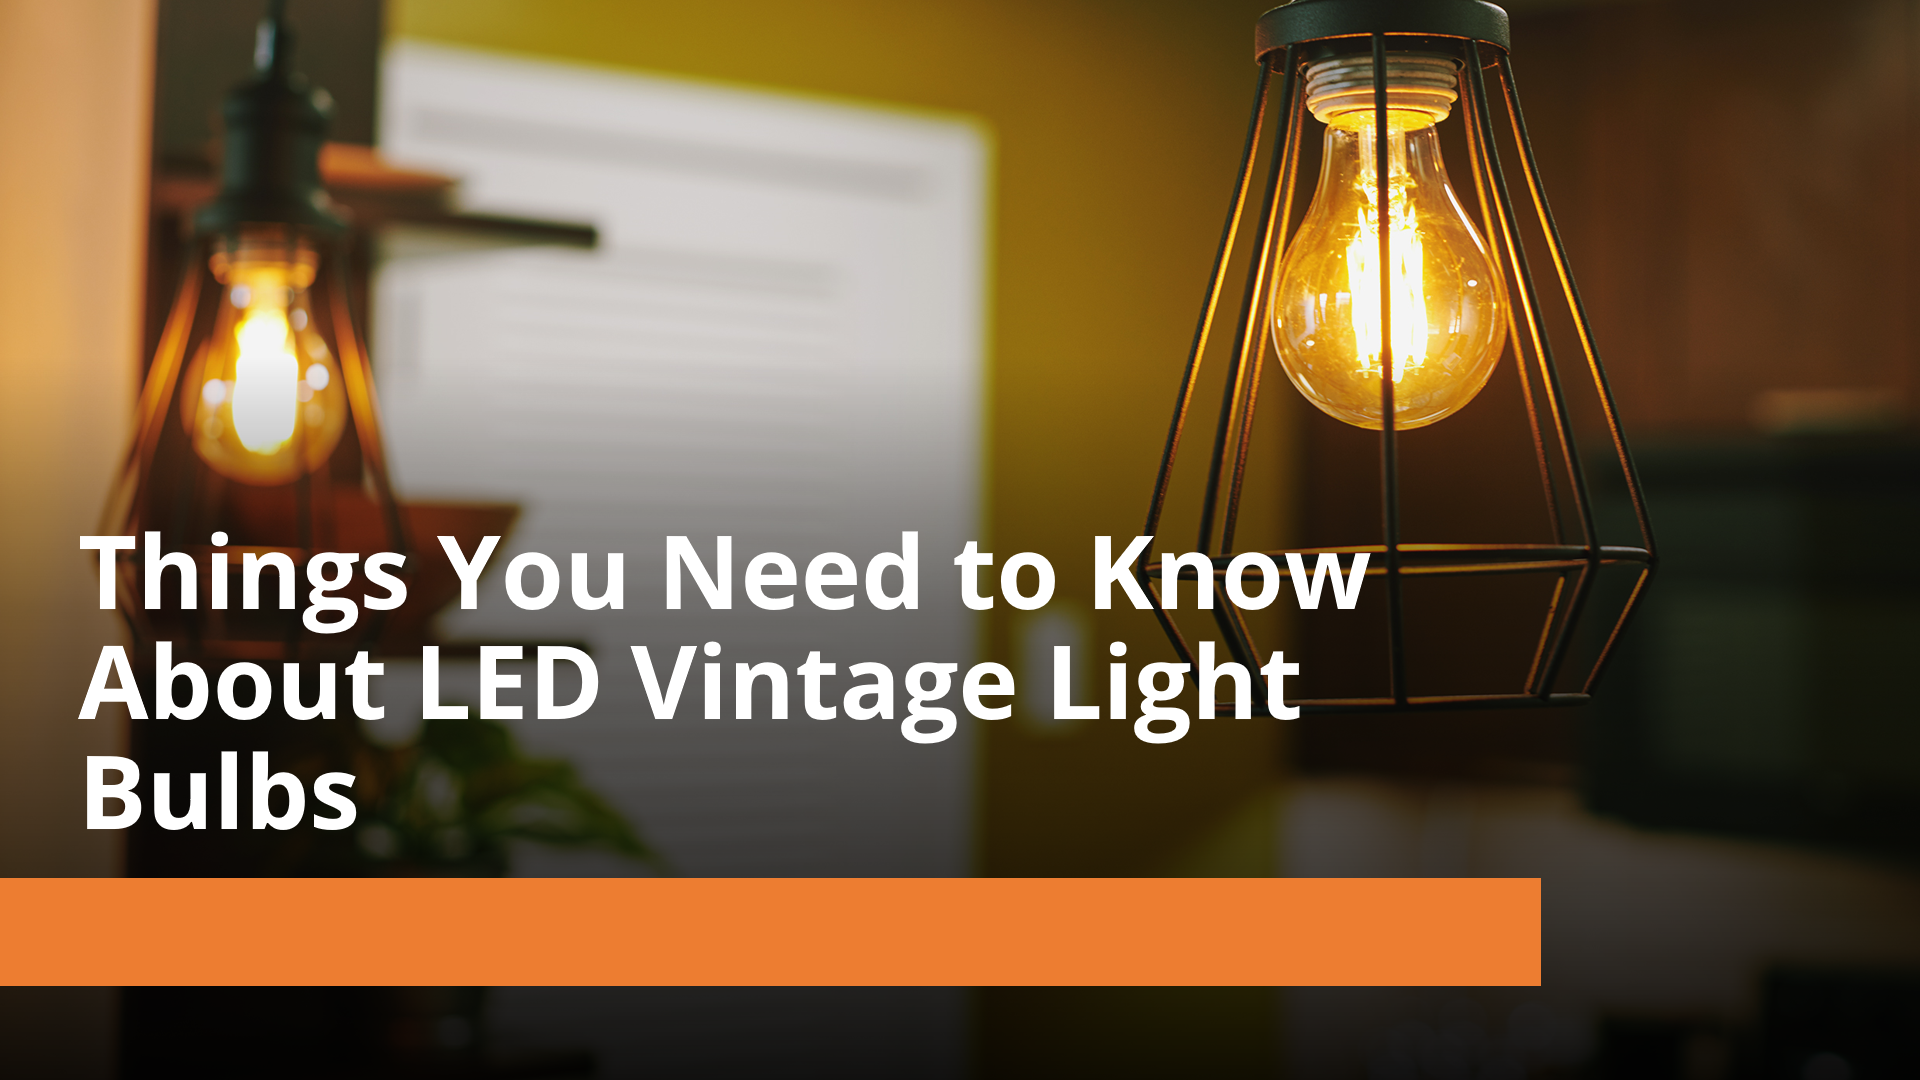 Things You Need to Know About LED Vintage Light Bulbs